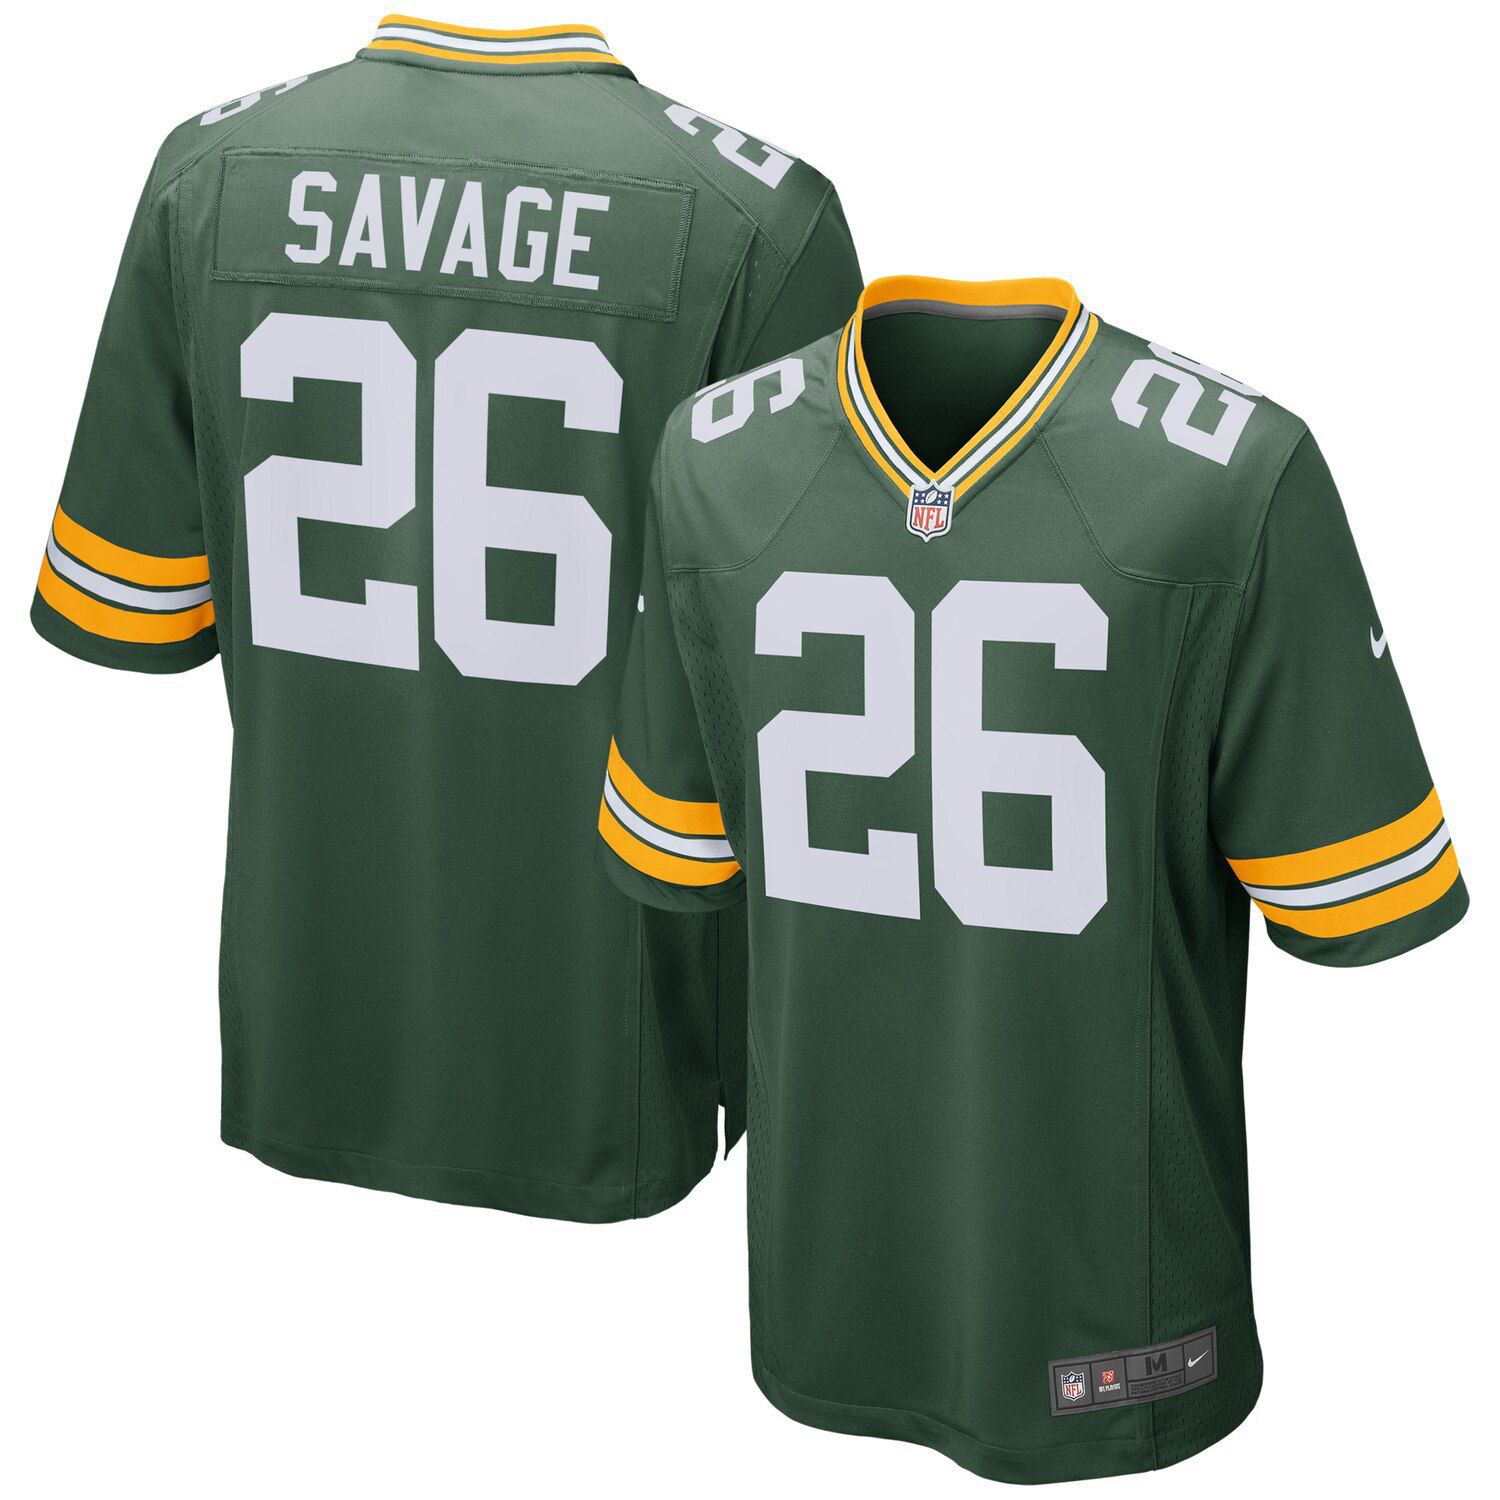 green bay packers savage jersey